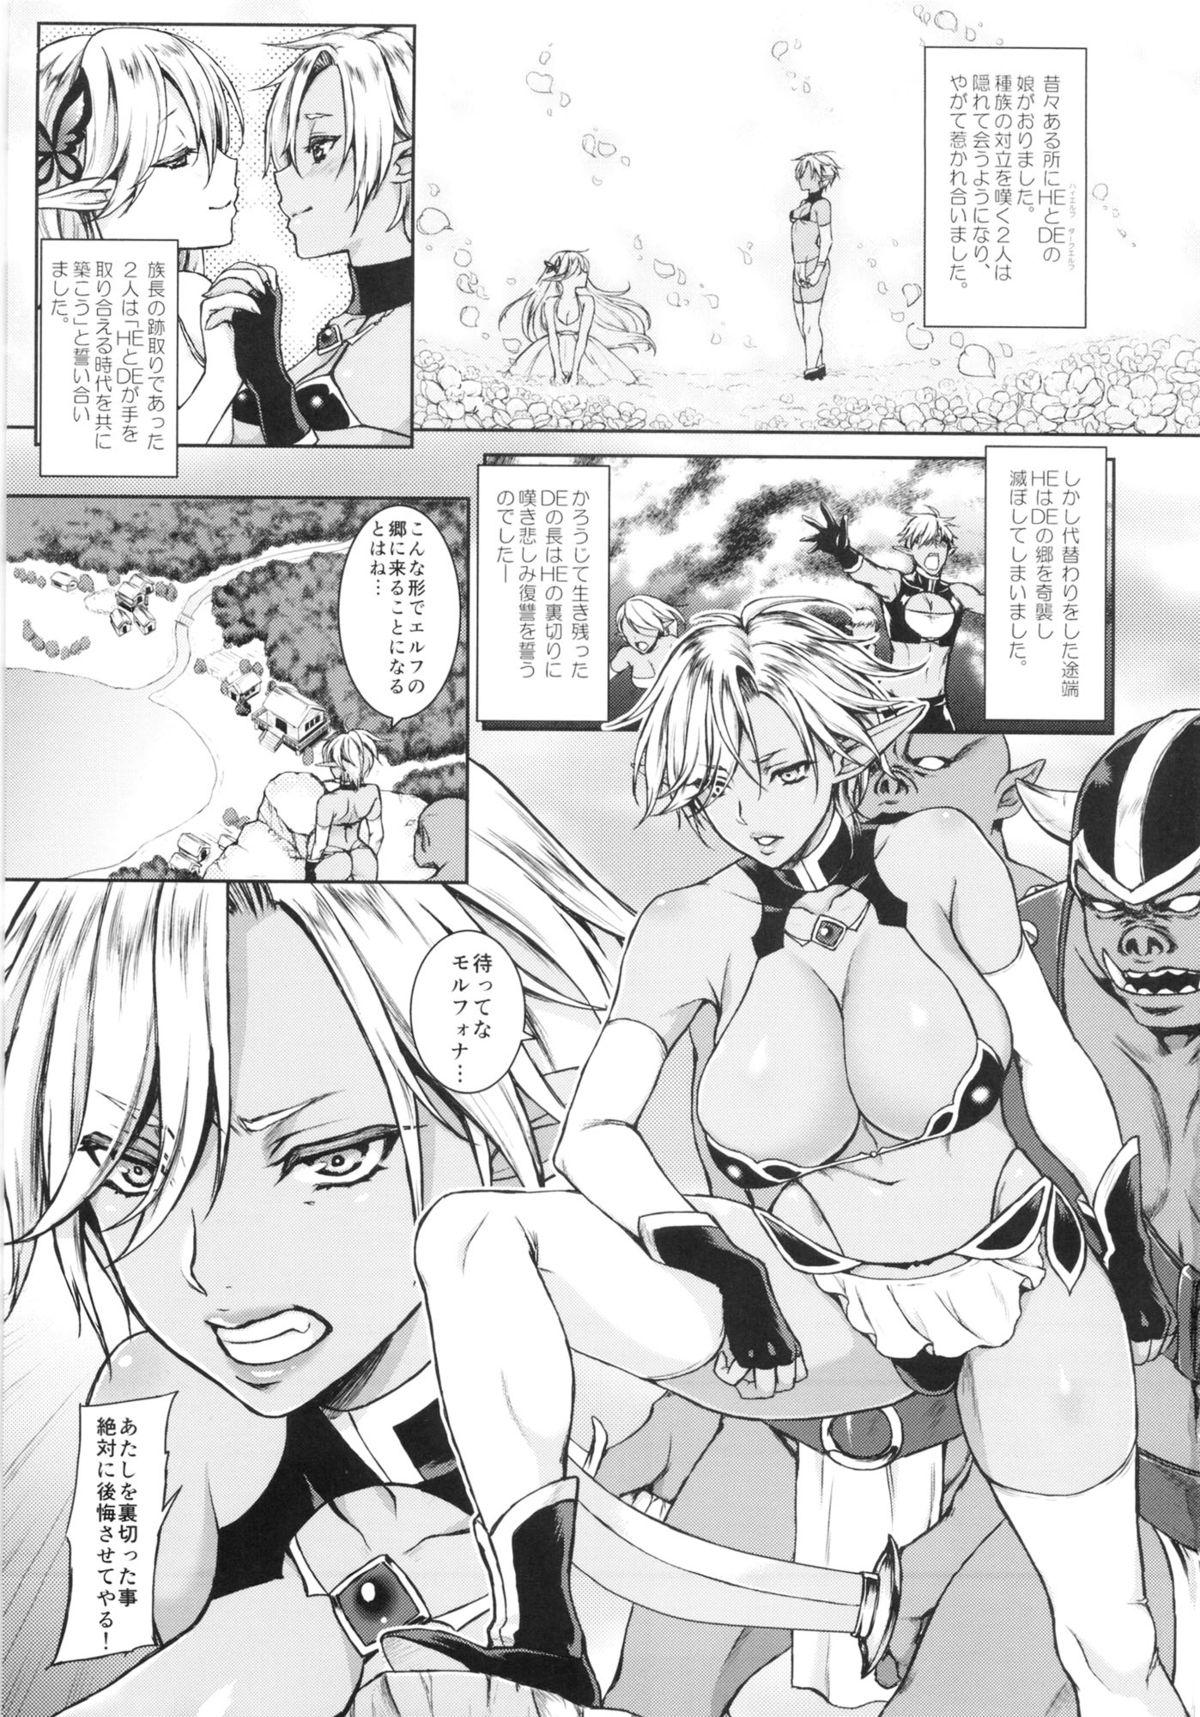 Gorda Kyouchou no Yume - The dream of mad morpho butterflies. Brasil - Page 2